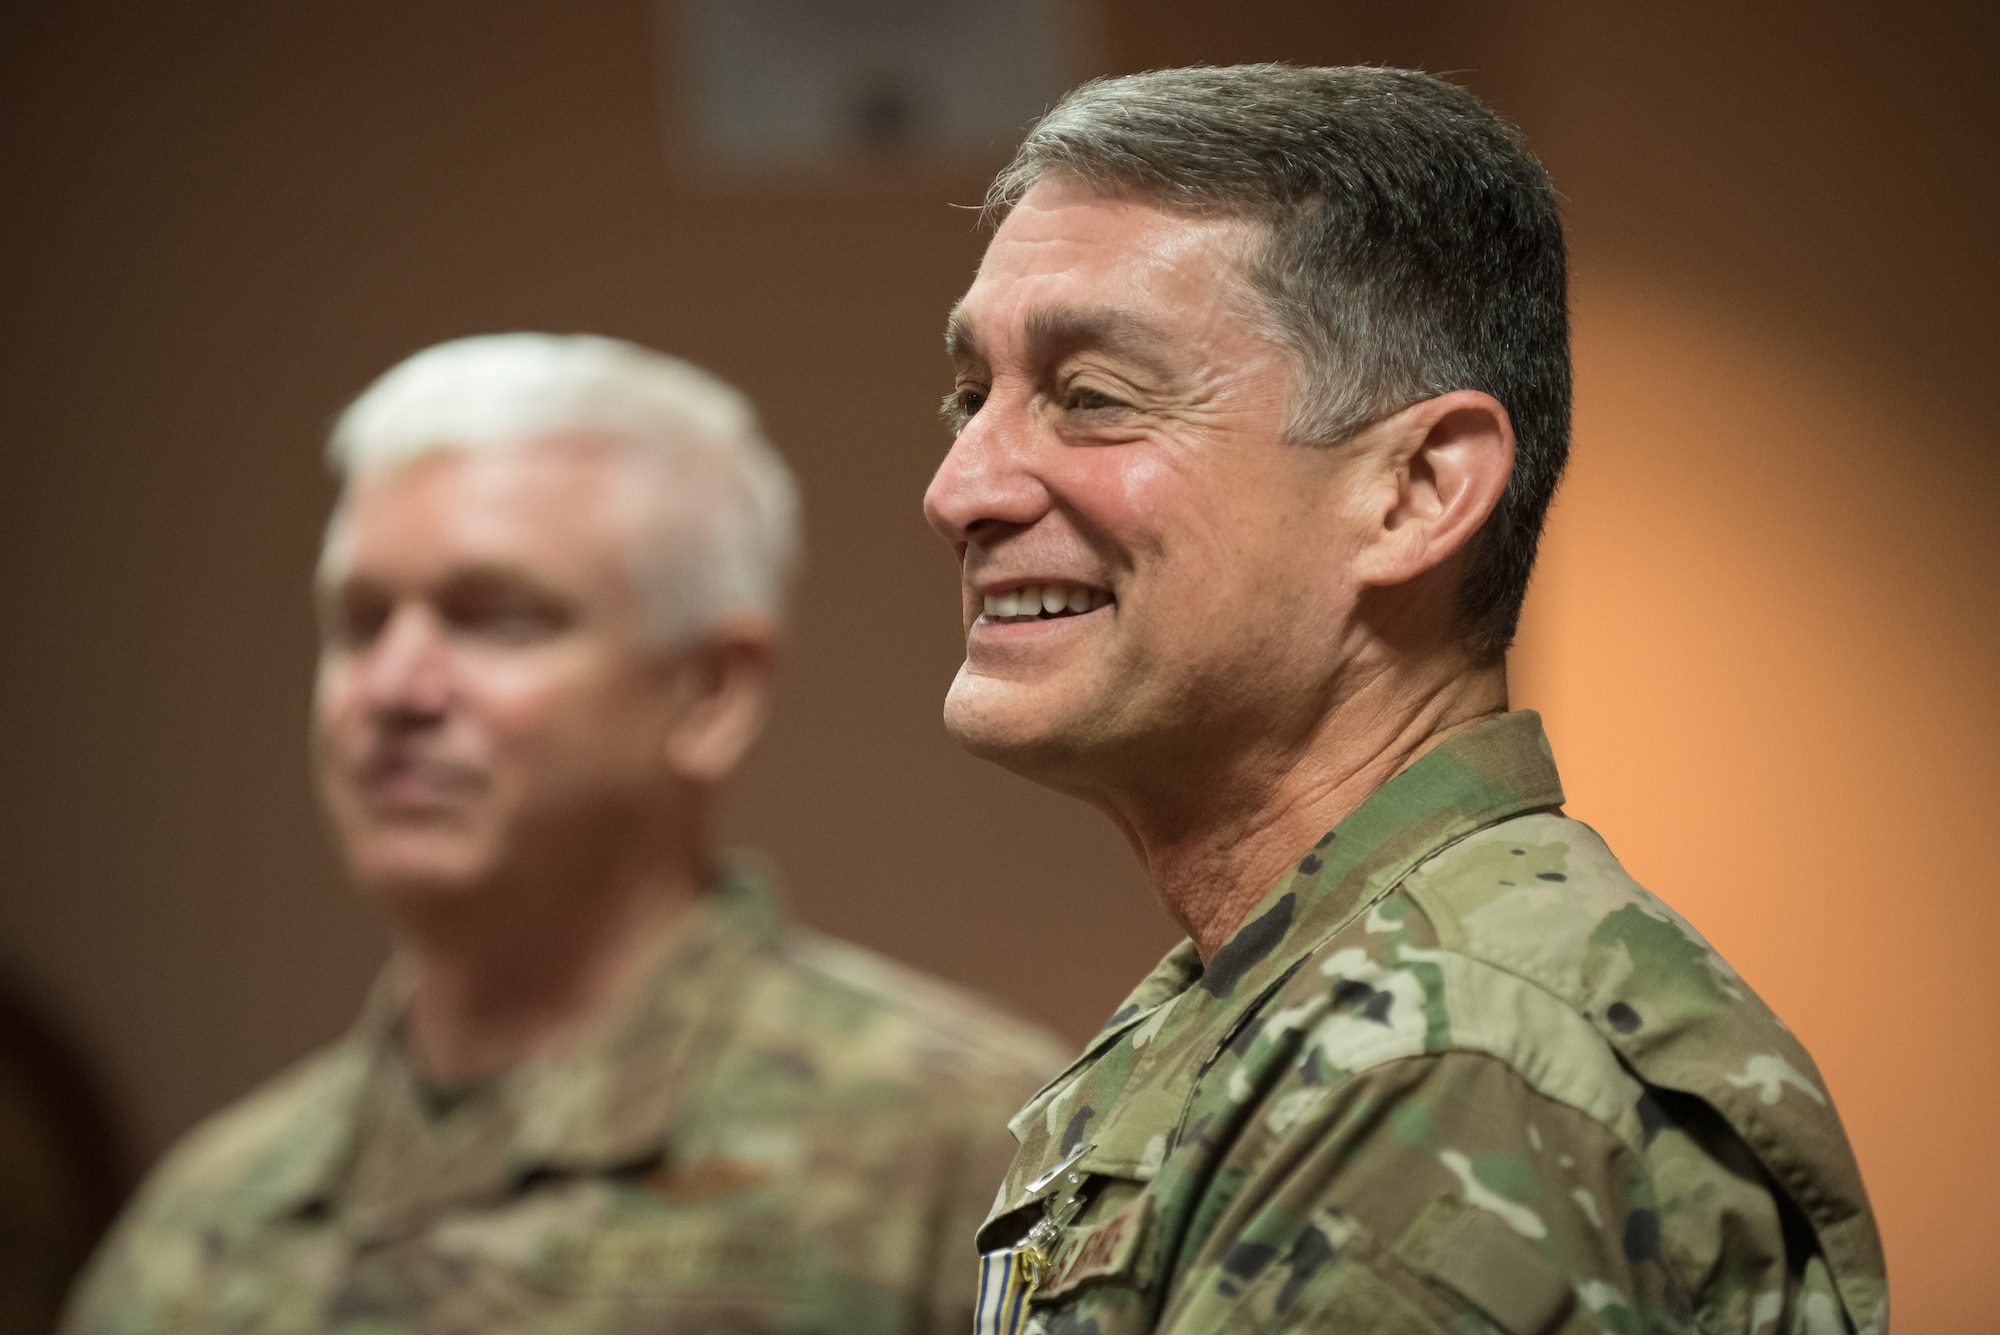 Brig. Gen. Warren Hurst, Kentucky’s assistant adjutant general for Air, speaks to members of the audience during a ceremony at the Kentucky Air National Guard base in Louisville, Ky., Aug. 10, 2019. Lt. Gen. L. Scott Rice, director of the Air National Guard, presented Hurst with the Distinguished Service Medal during the ceremony, recognizing Hurst's exceptionally meritorious service in duties of great responsibility. (U.S. Air National Guard photo by Dale Greer)